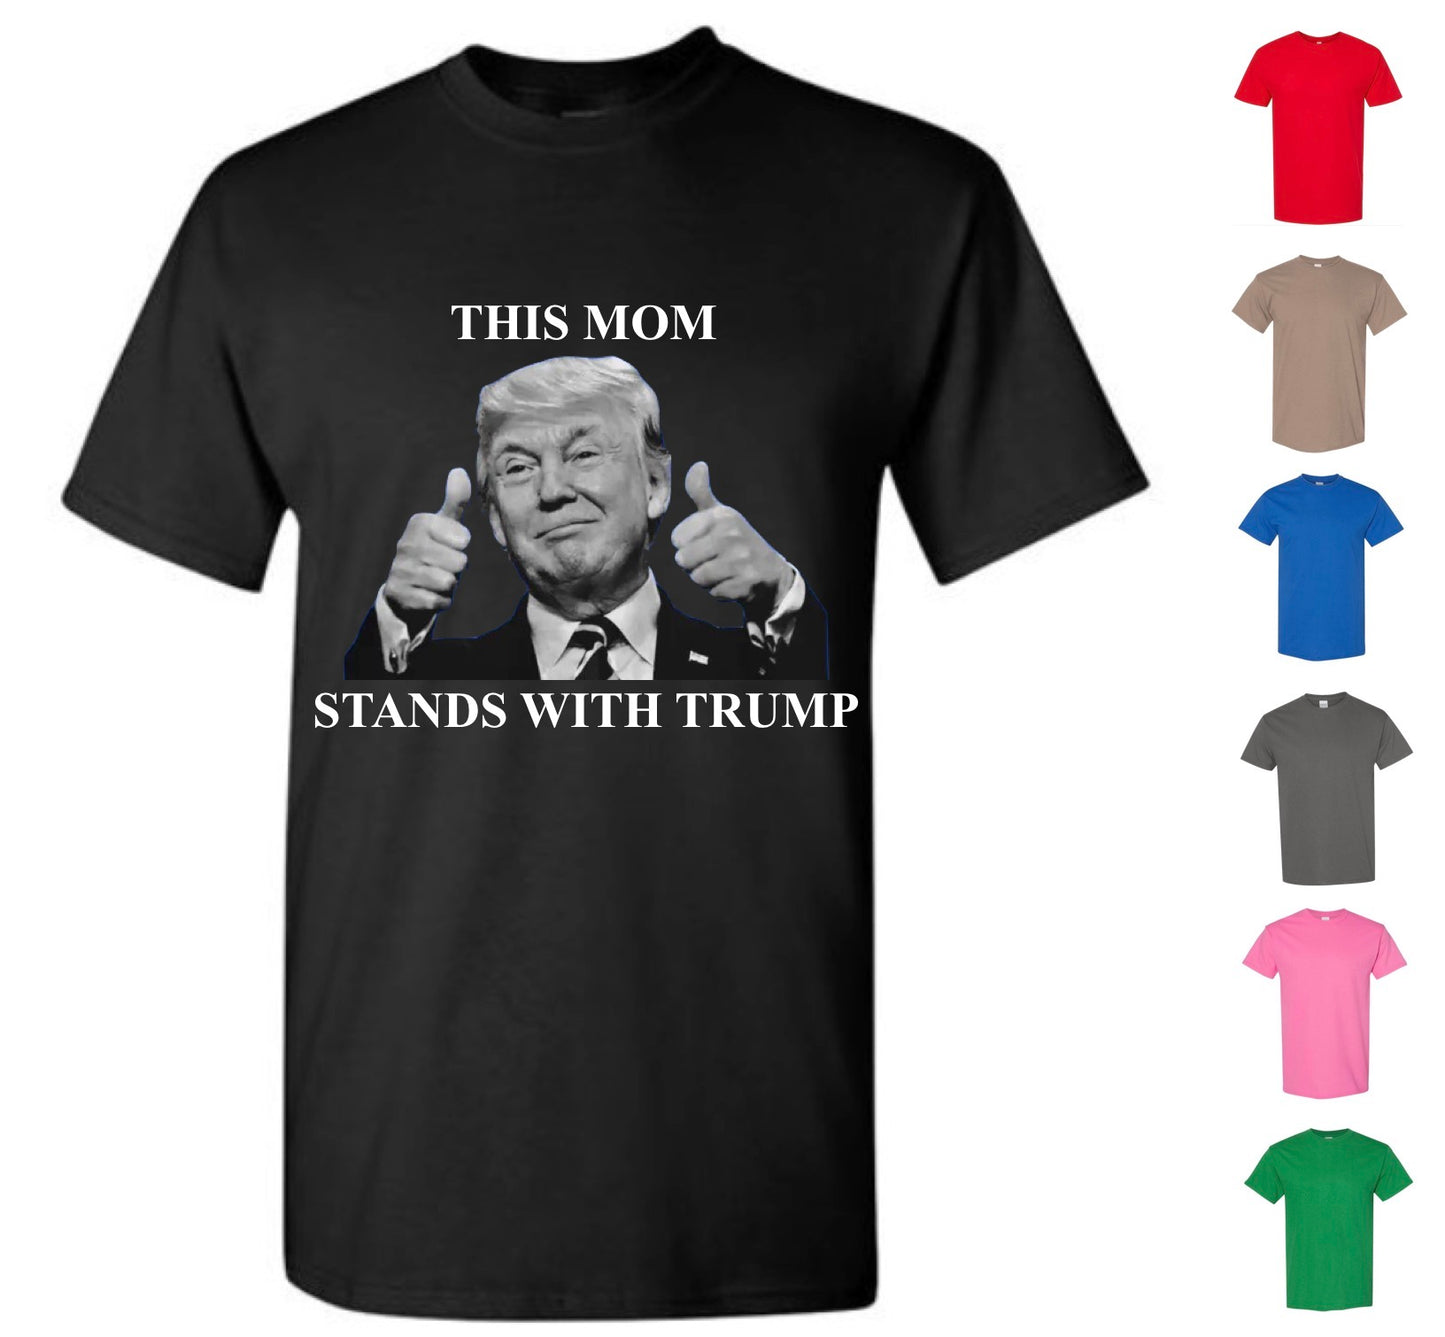 This Mom Stands With Trump (FREE Shipping)